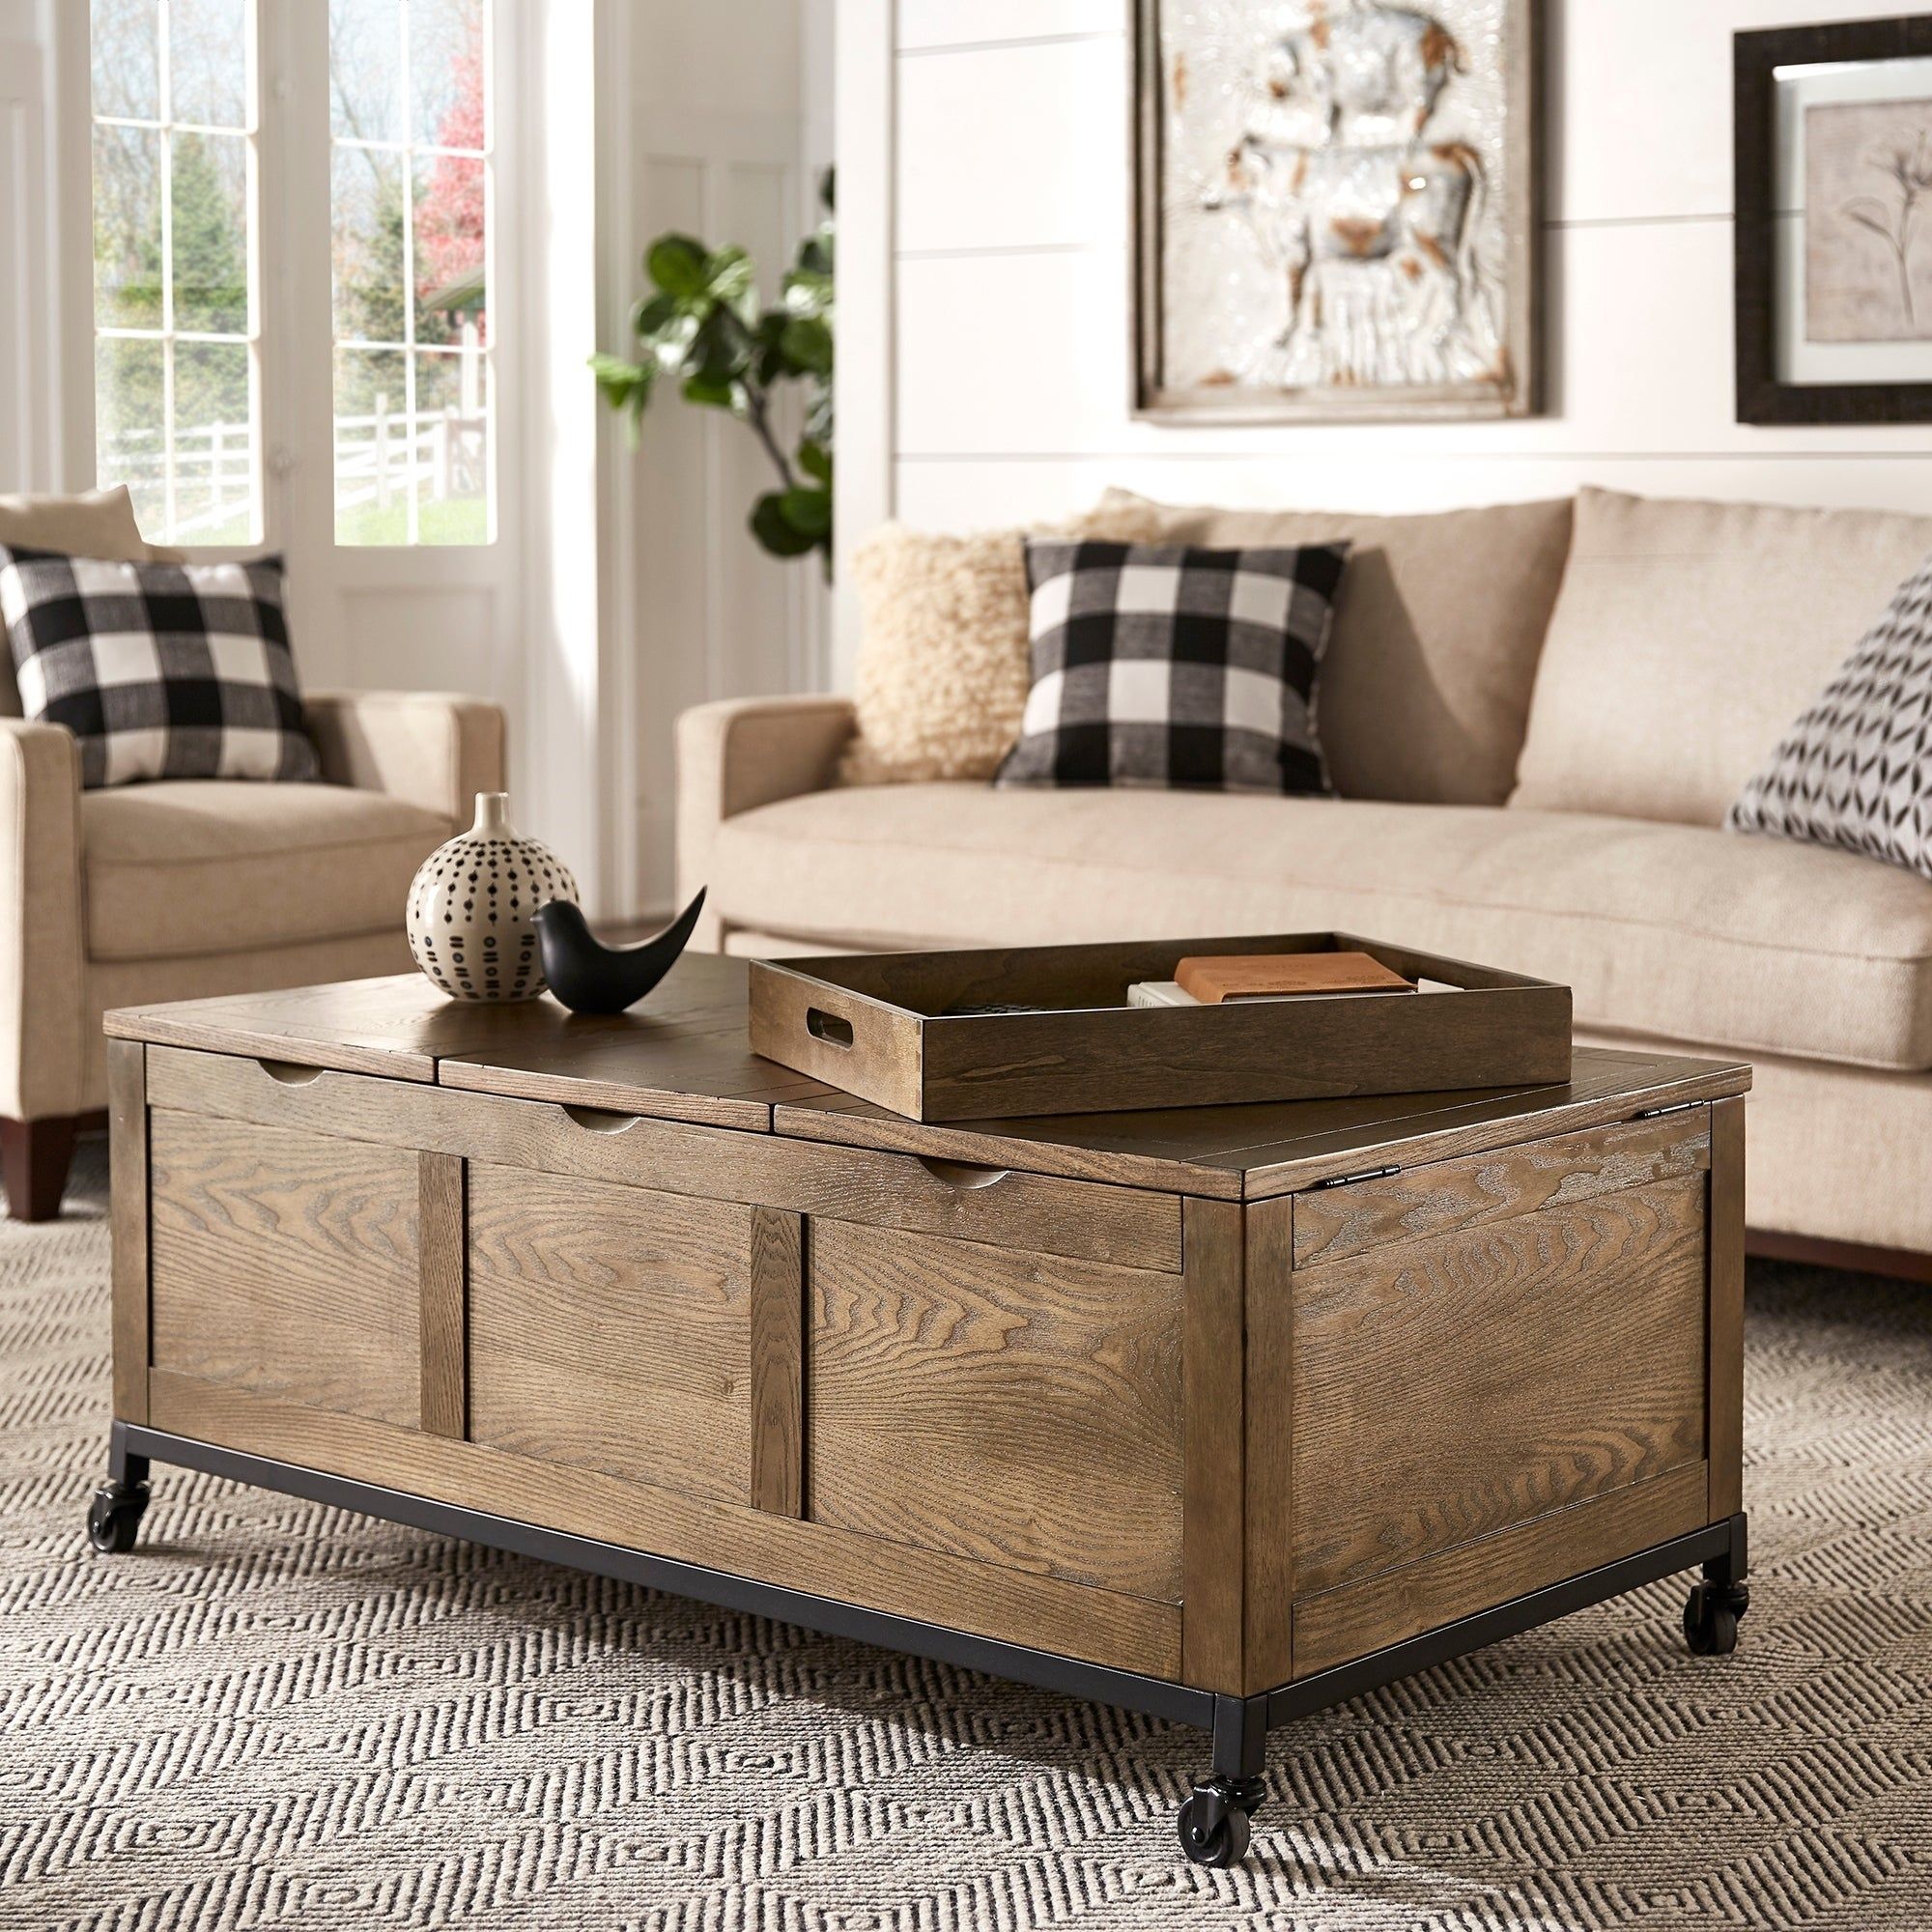 Shay Rectangular Storage Coffee Table With Removeable Tray And Caster  Wheelsinspire Q Artisan – On Sale – Overstock – 22408028 With Regard To Rectangle Coffee Tables (View 18 of 20)